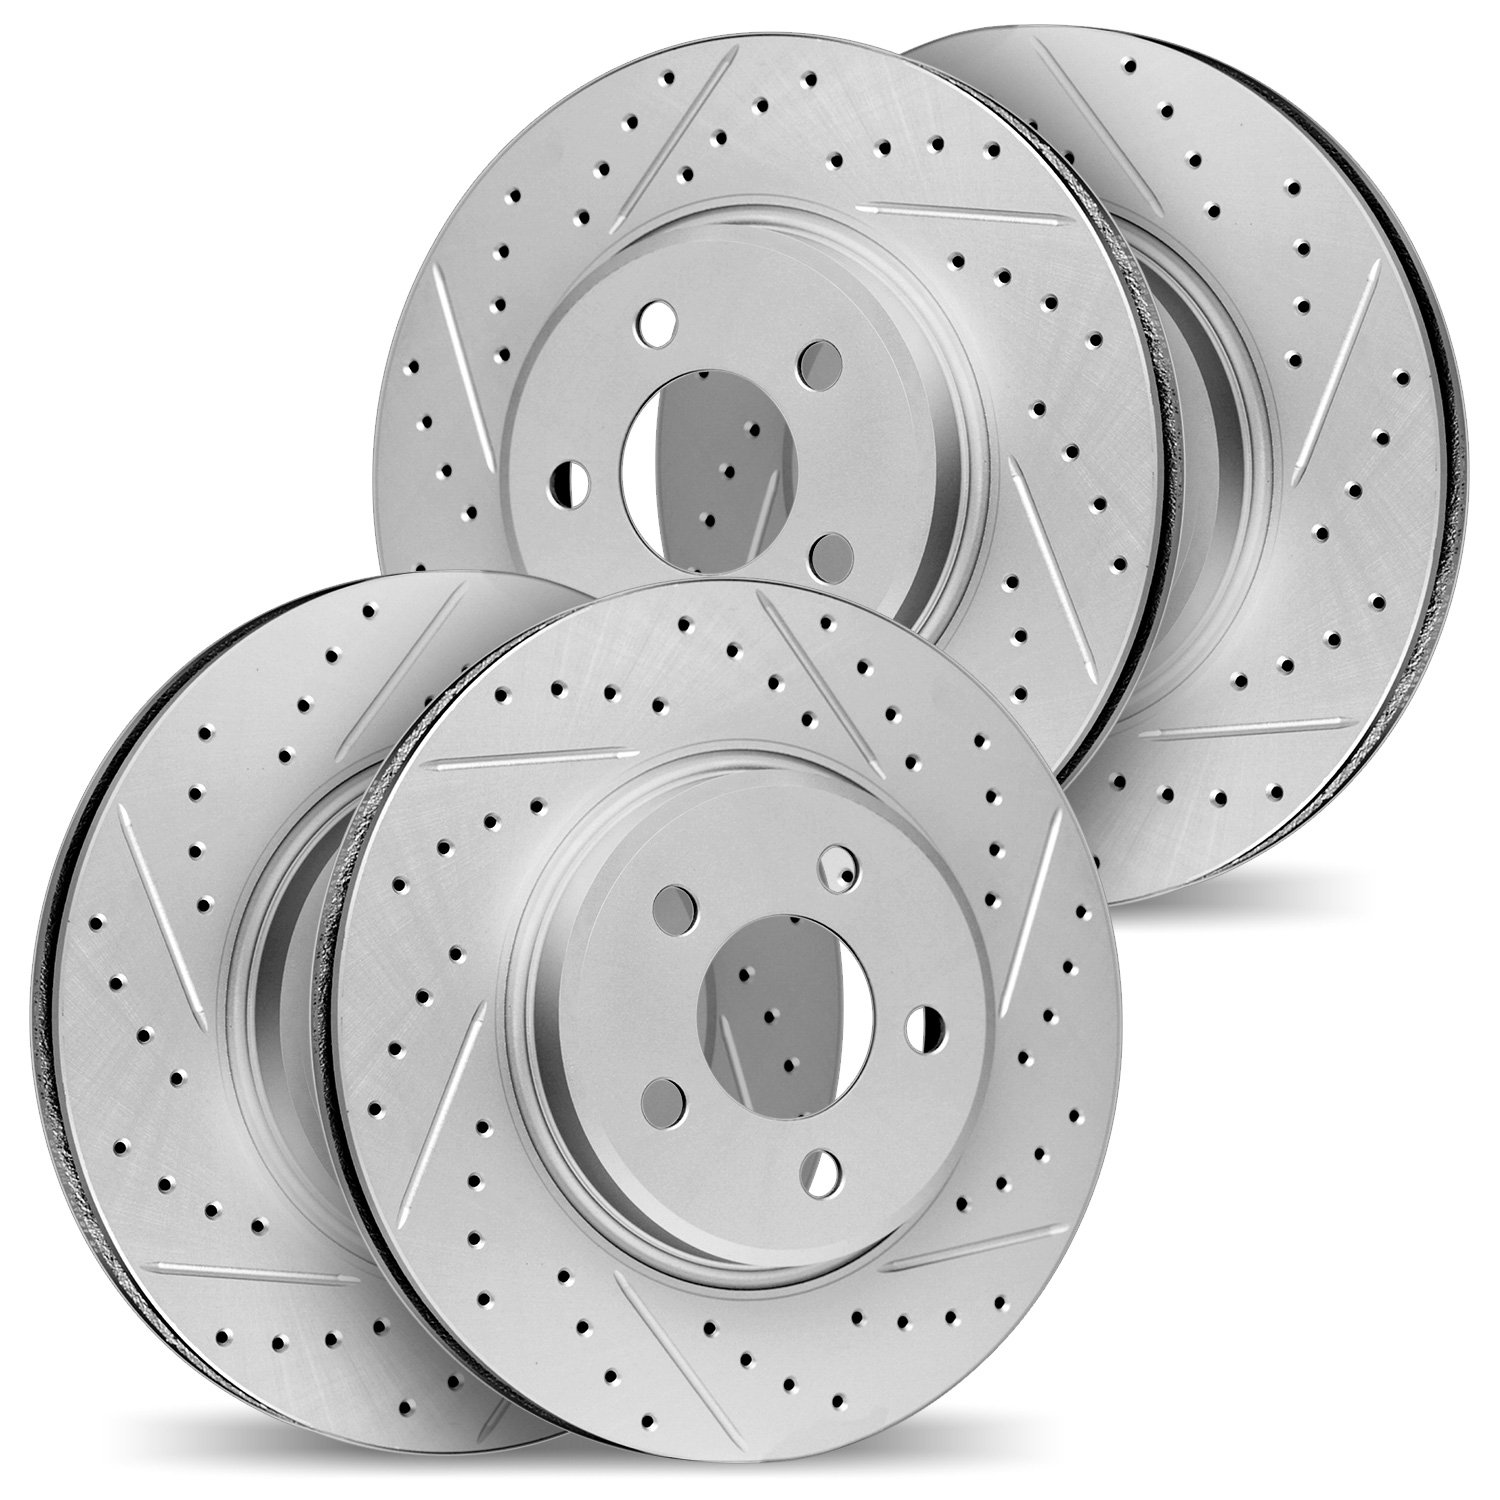 2004-03025 Geoperformance Drilled/Slotted Brake Rotors, 2012-2017 Kia/Hyundai/Genesis, Position: Front and Rear